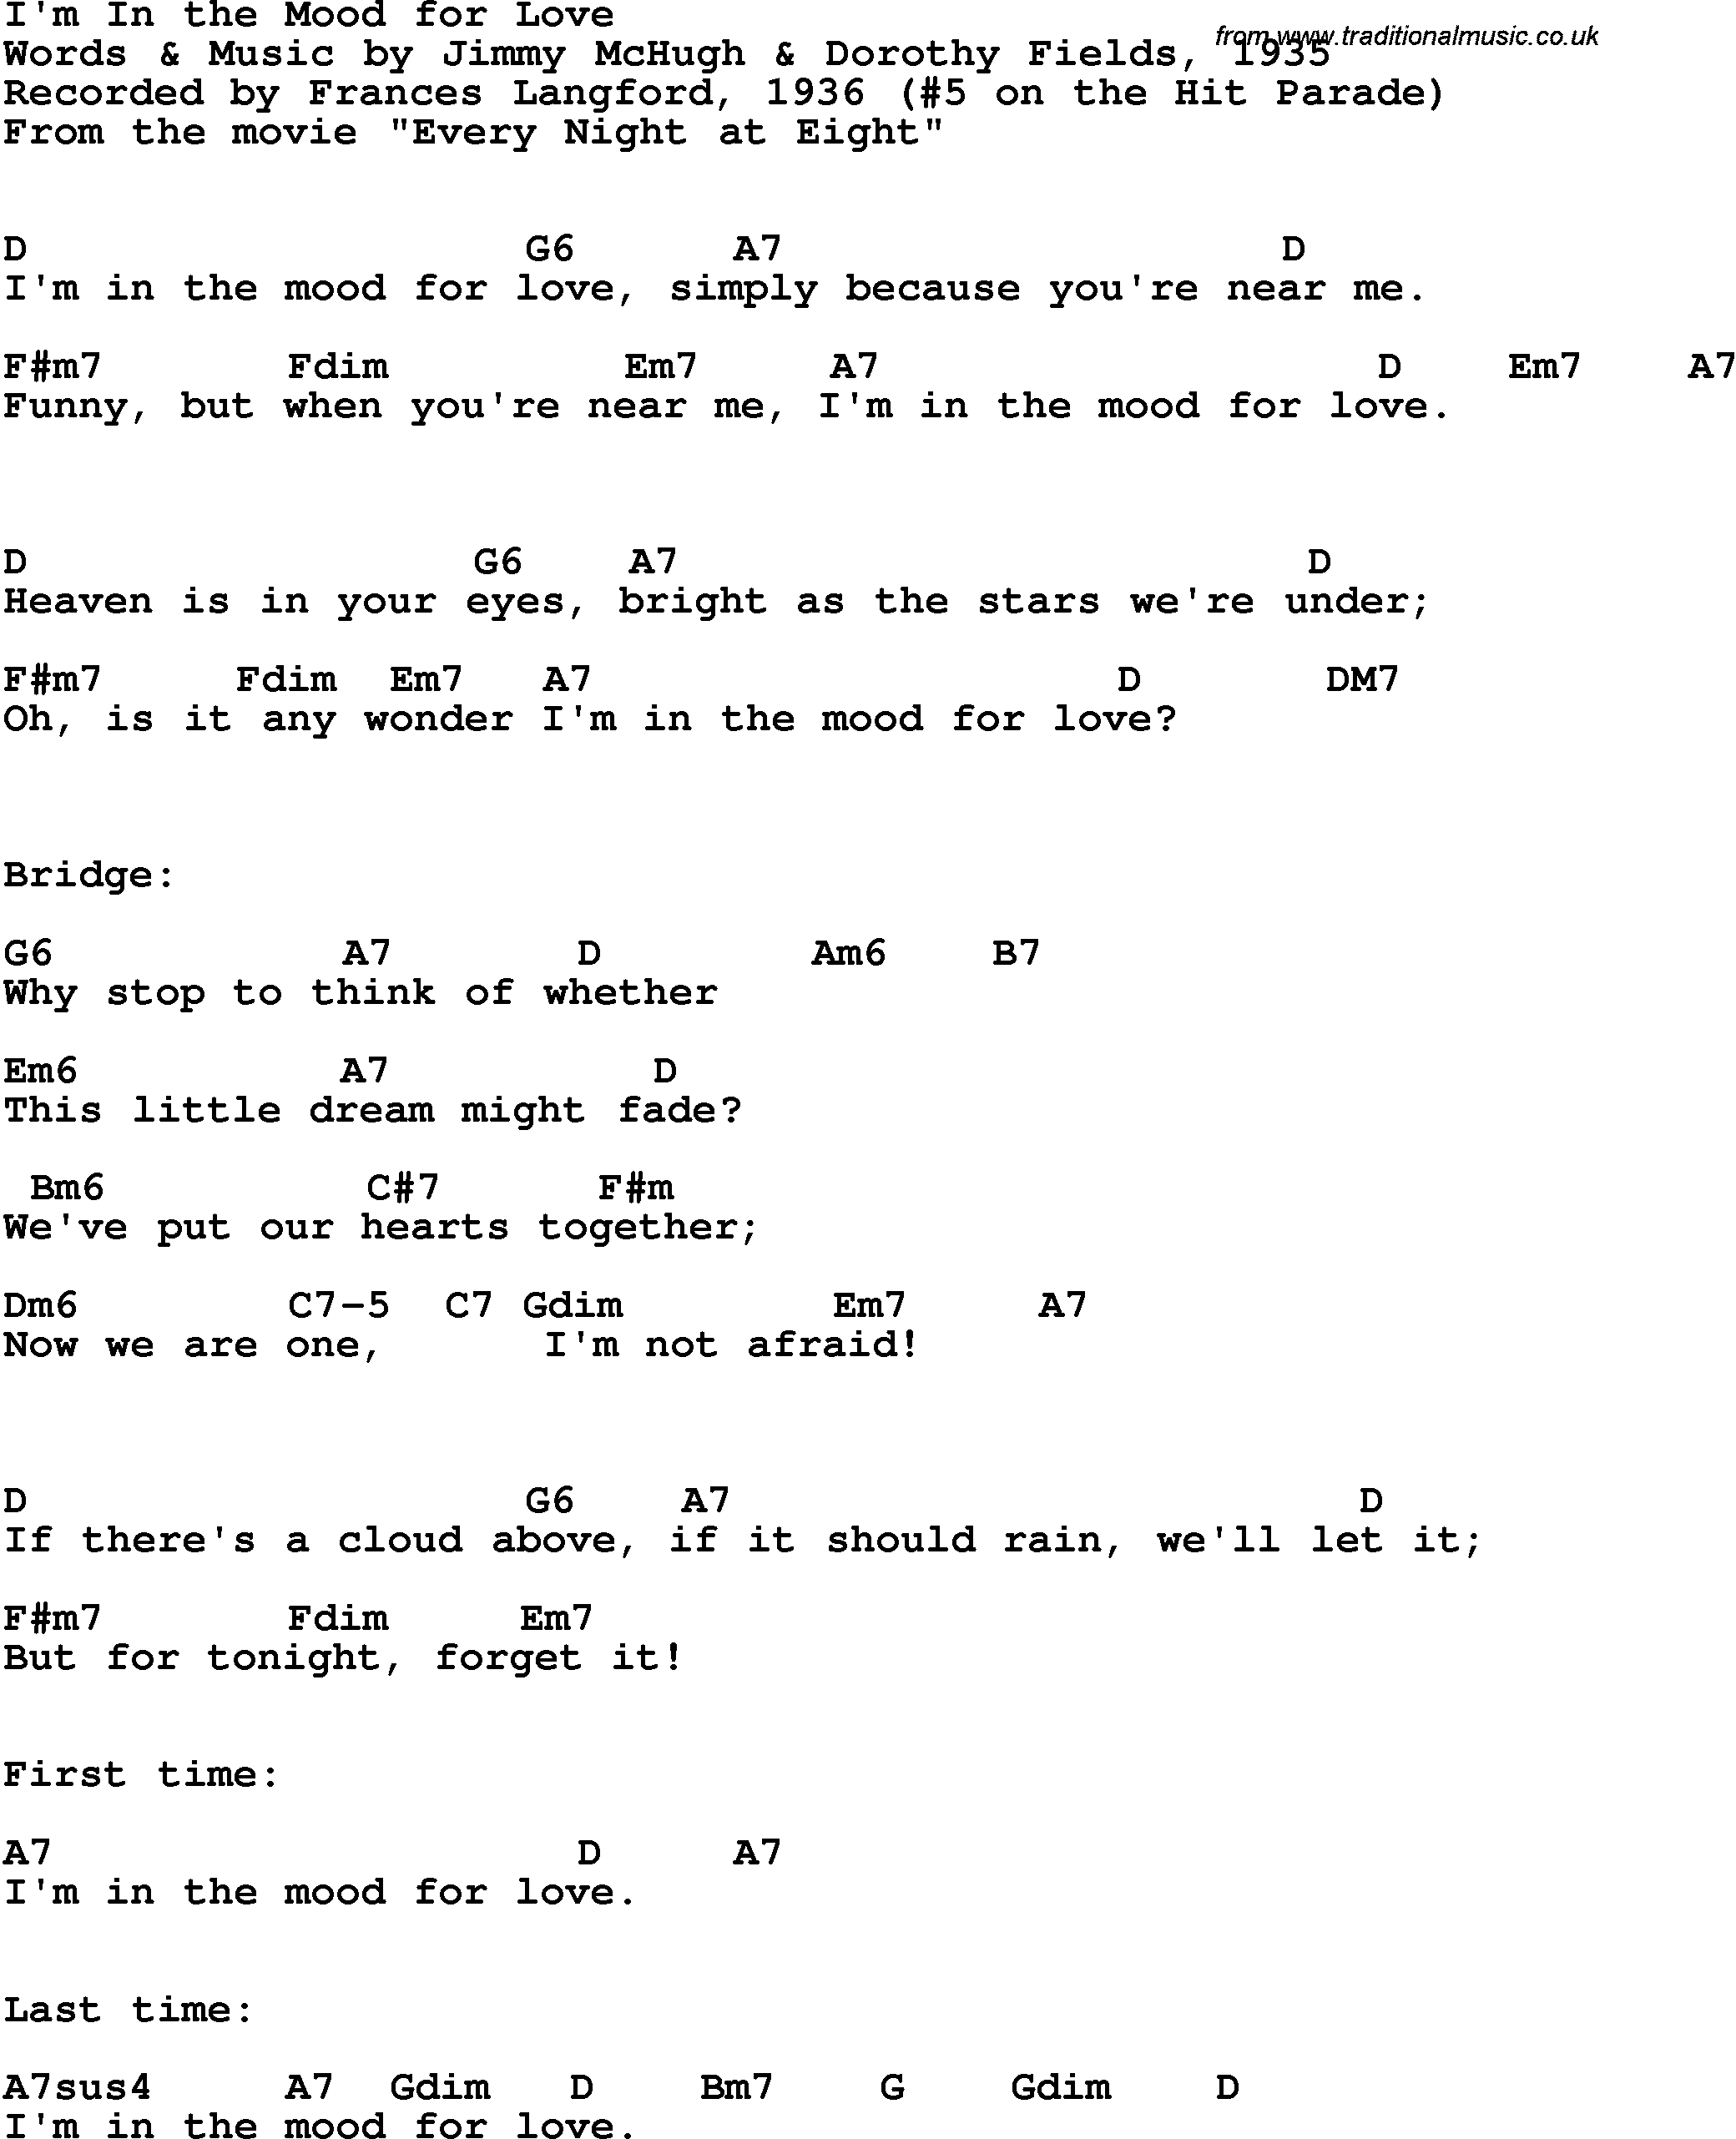 Song Lyrics with guitar chords for I'm In The Mood For Love - Frances Langford, 1936